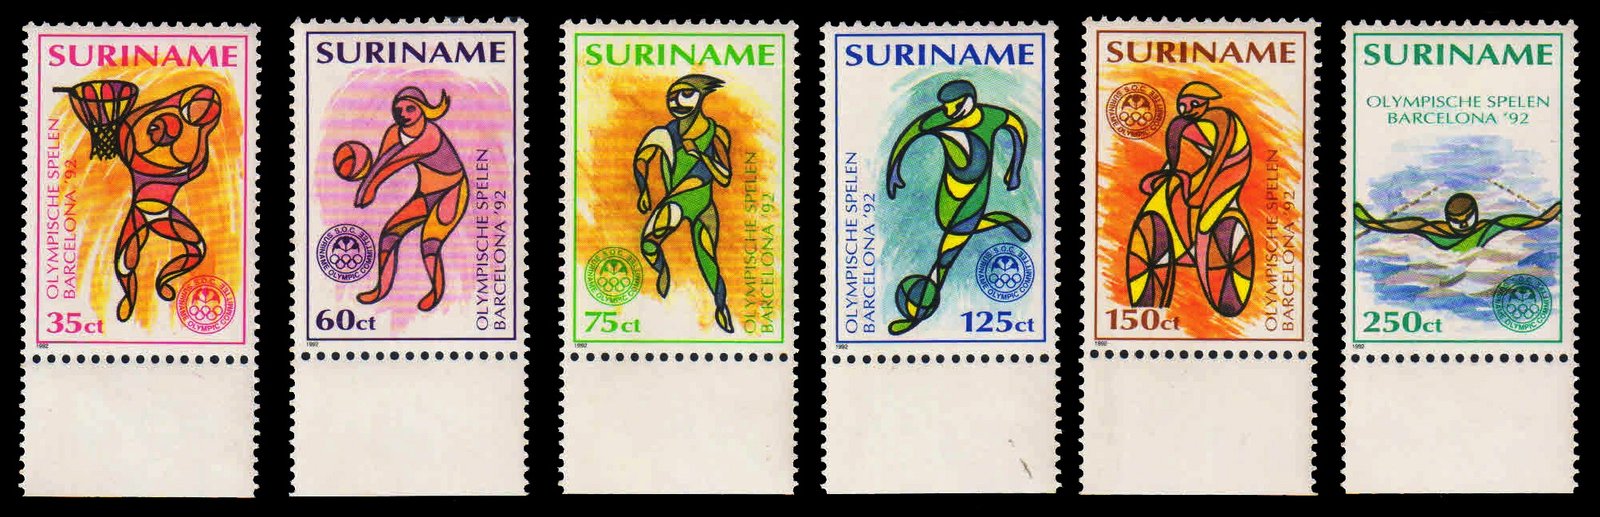 SURINAM 1972 - Olympic Games. Basketball, Volleyball, Sprinting, Football, Cycling, Swimming. Set of 6 Stamps, MNH Stamps. S.G. 1518-1523. Cat £ 16